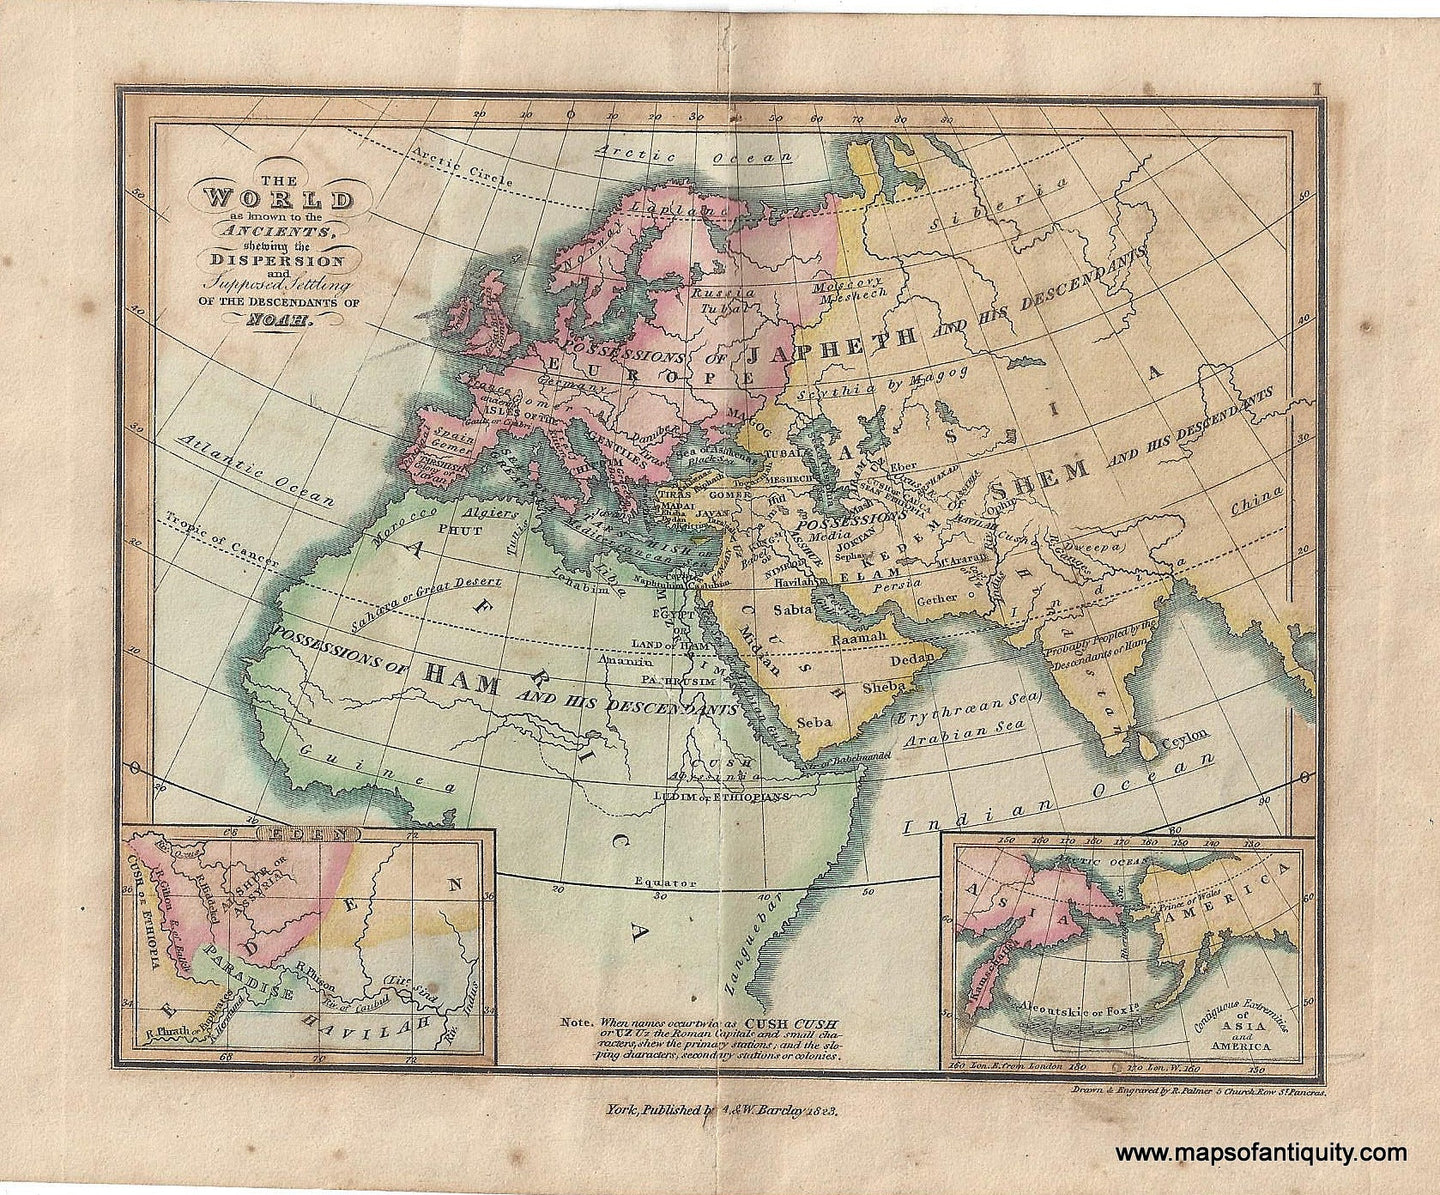 Genuine-Antique-Map-The-World-as-known-to-the-Ancients-shewing-the-Dispersion-and-Supposed-Settling-of-the-Descendants-of-Noah--1823-Palmer-Maps-Of-Antiquity